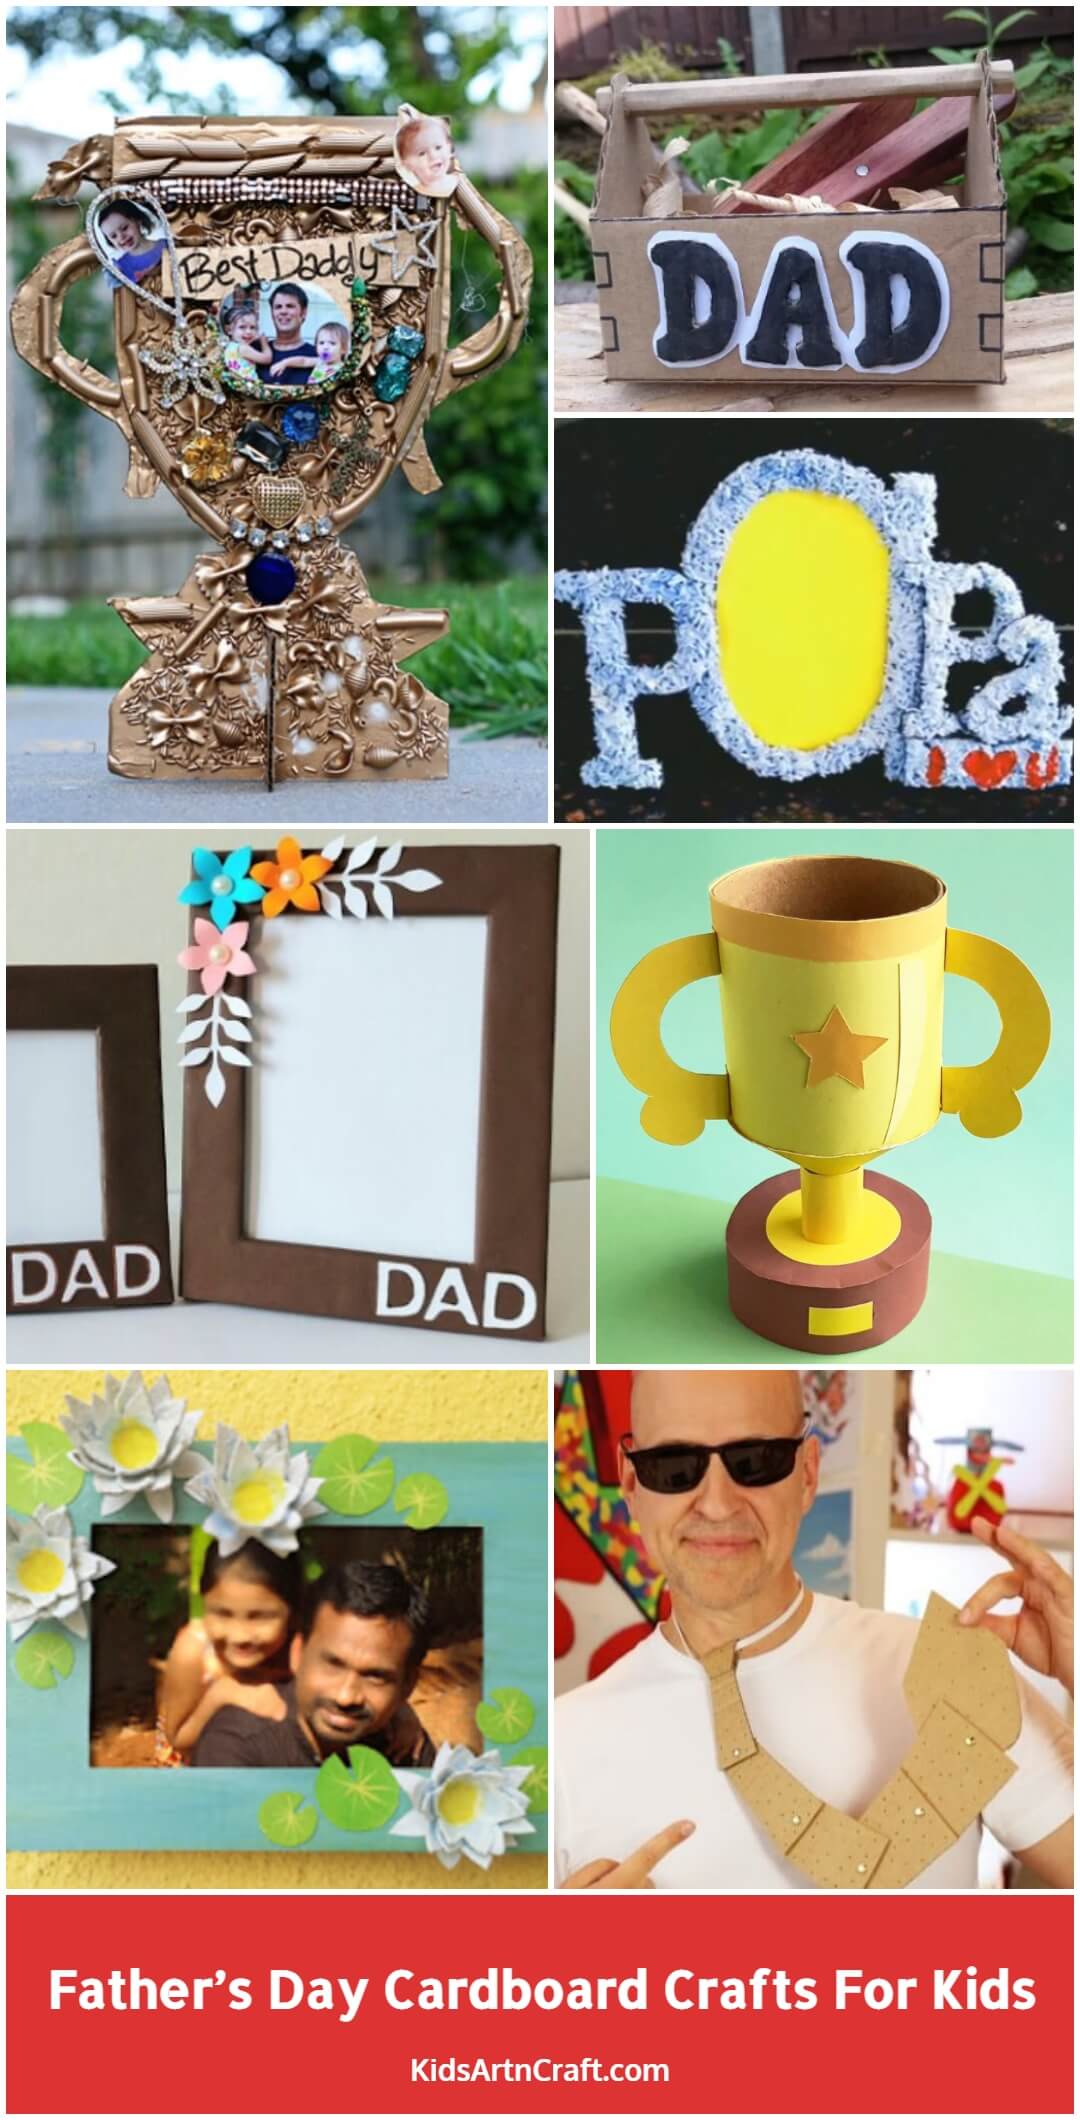 Father’s Day Cardboard Crafts For Kids